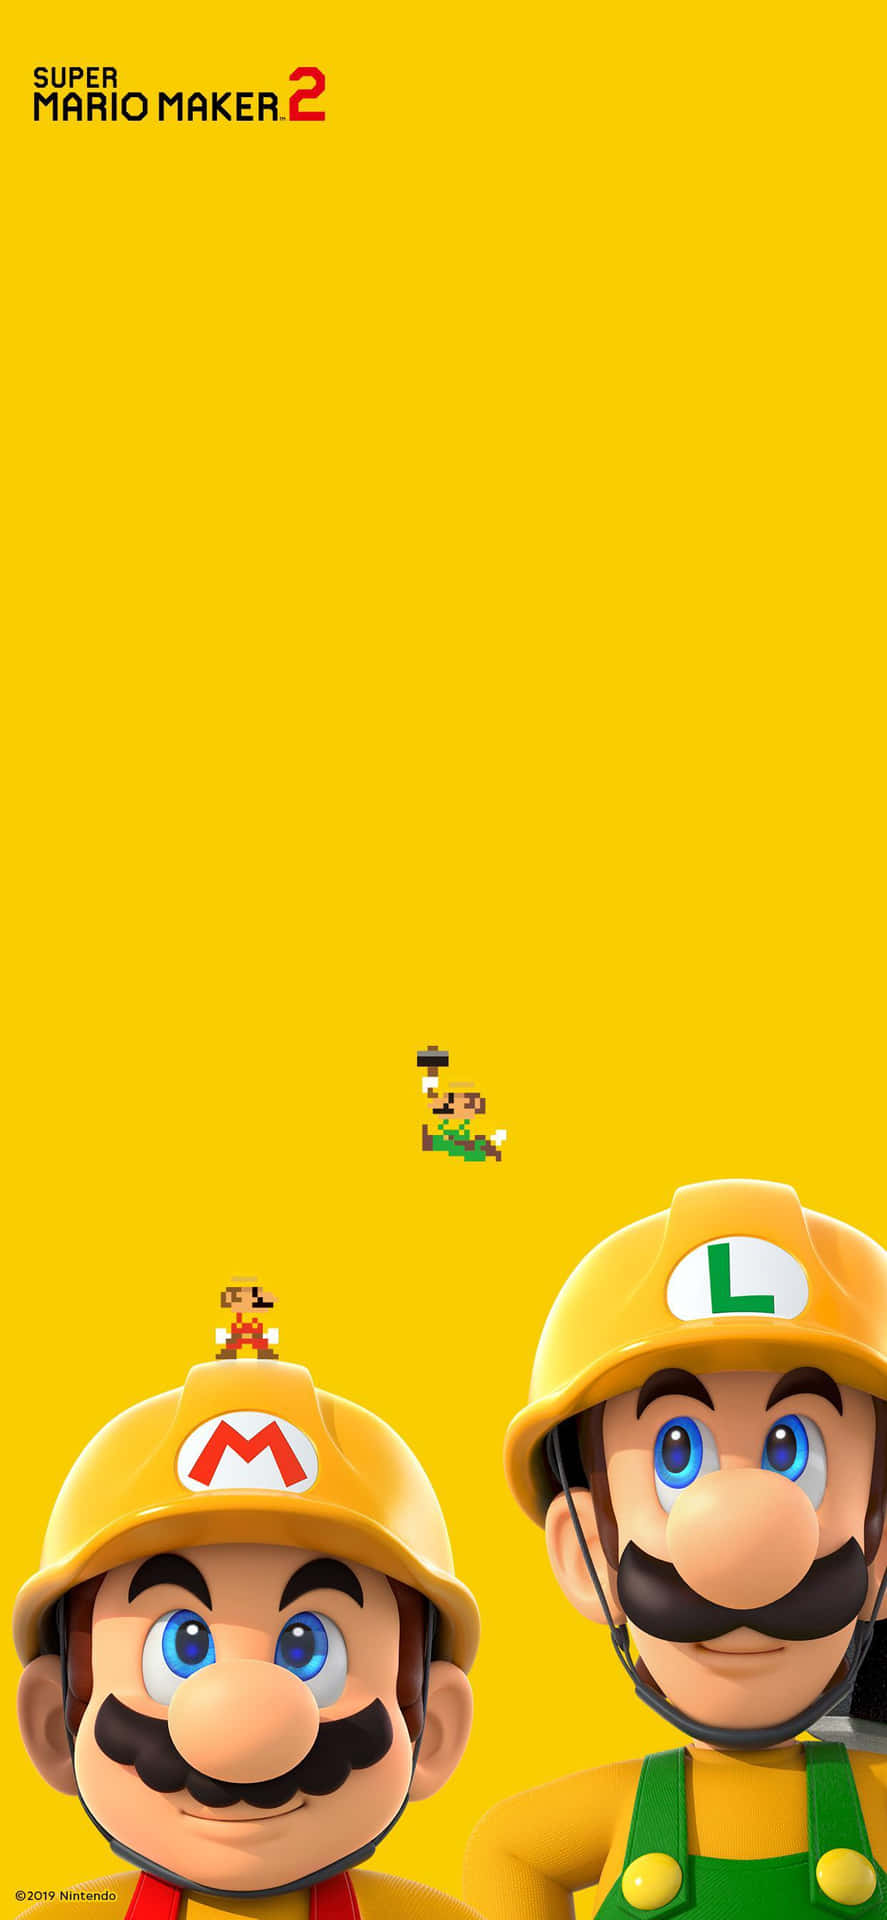 Feel nostalgic with the new Super Mario iPhone Wallpaper